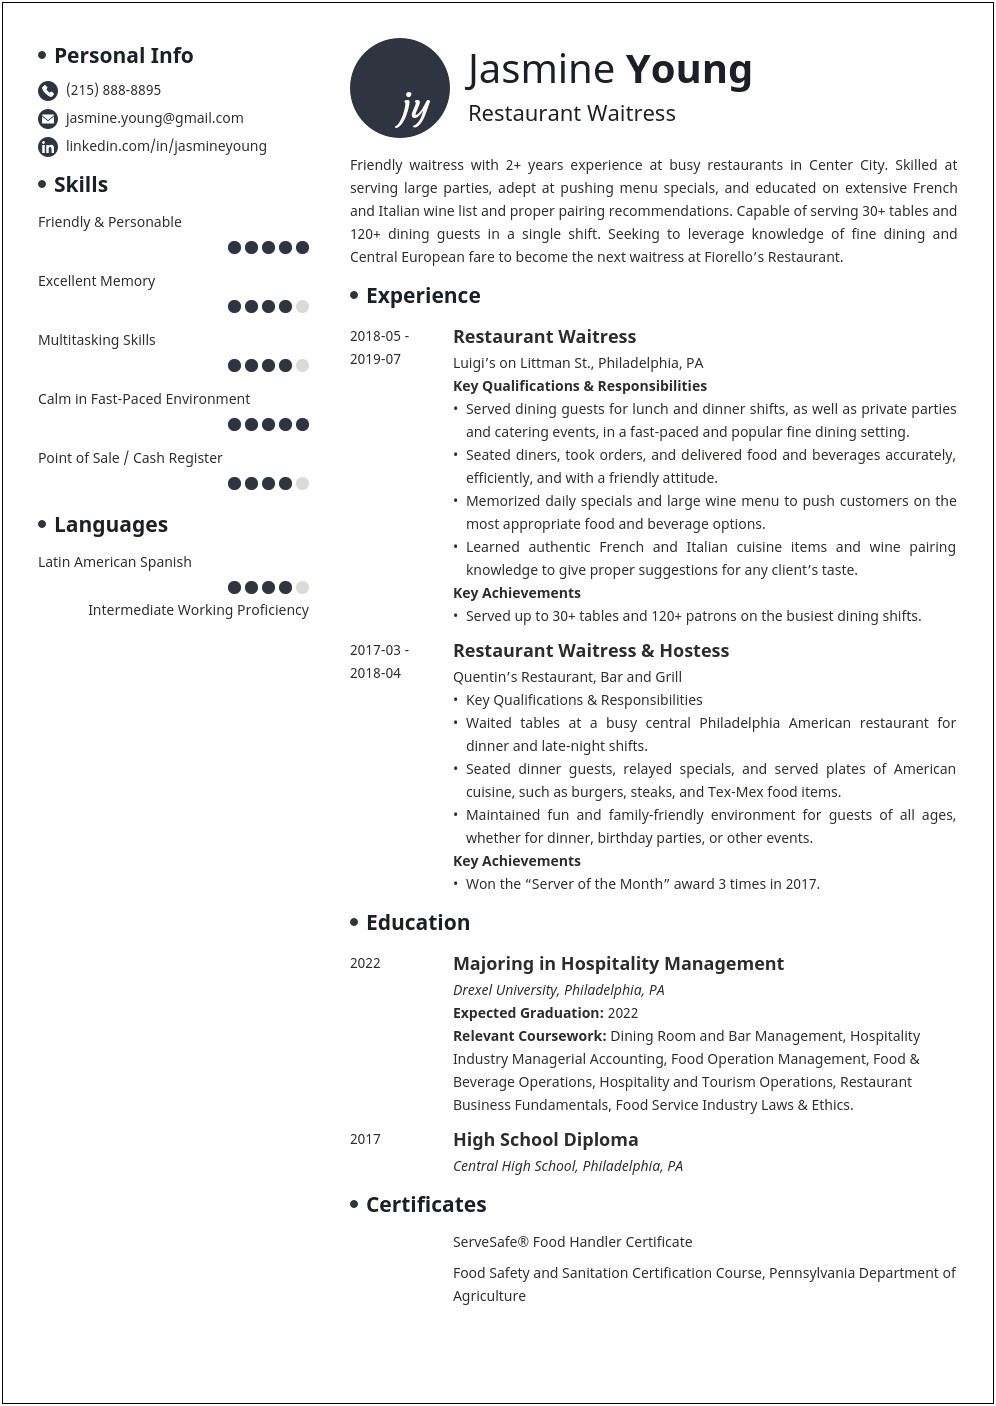 Resume Professional Summary For A 16 Year Old